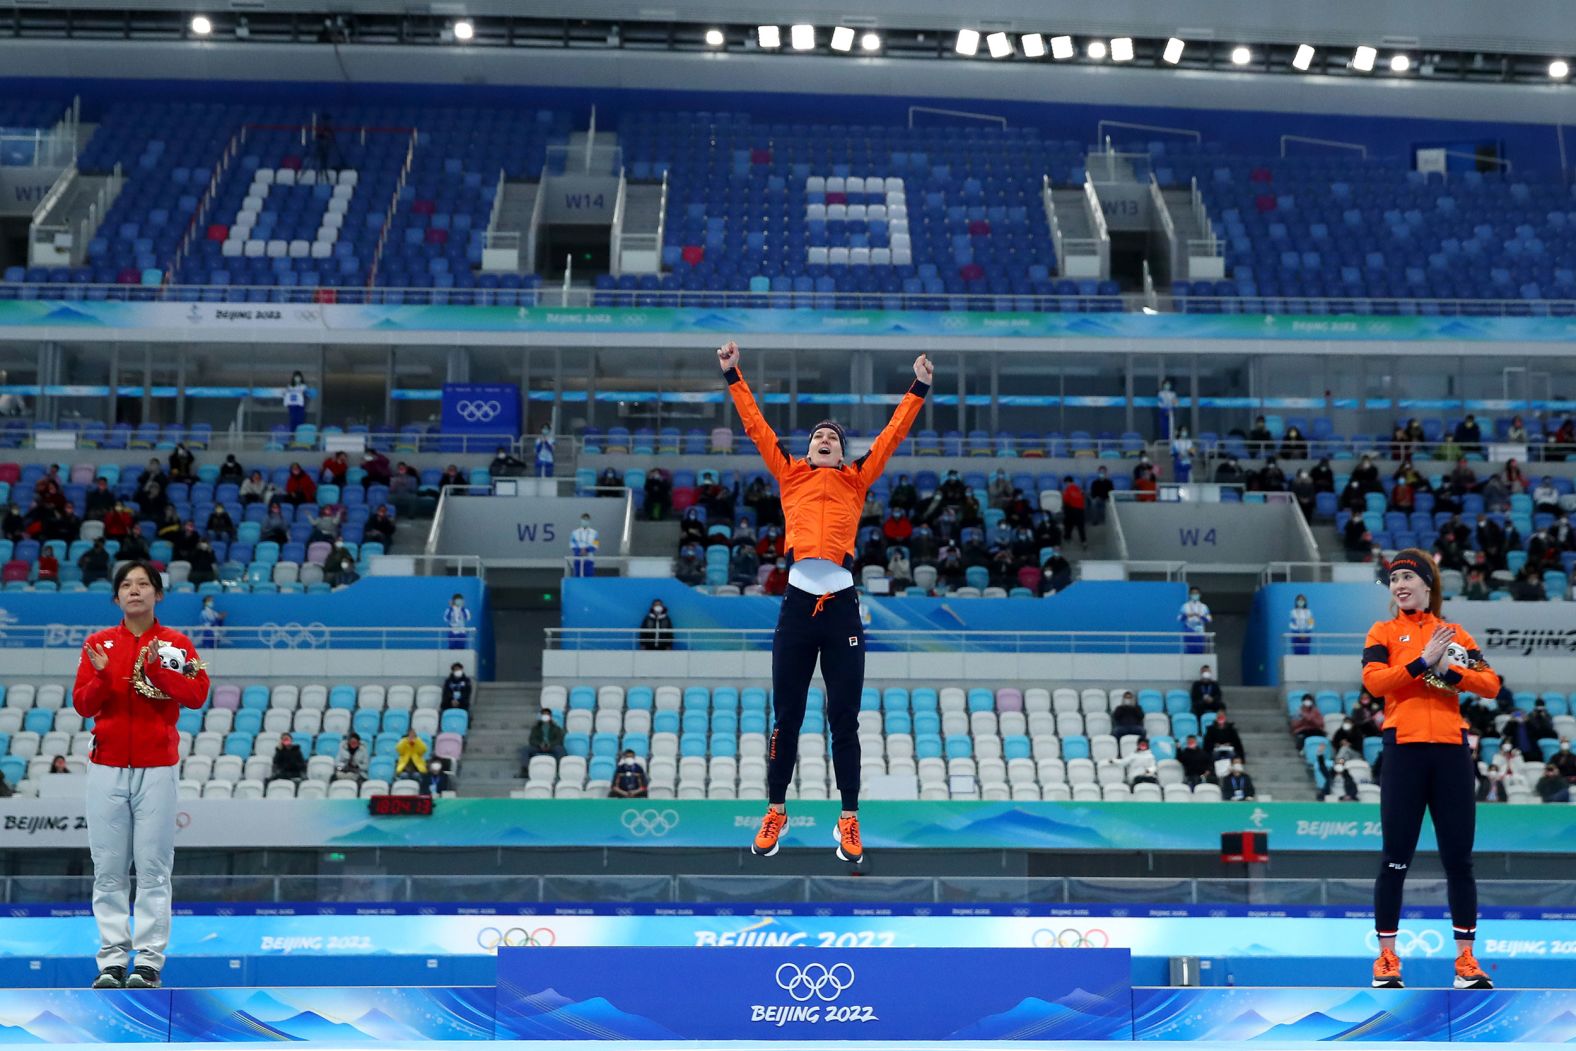 Dutch speedskater Ireen Wüst celebrates on the podium after winning the 1,500 meters on February 7. The 35-year-old became the<a href="https://www.cnn.com/world/live-news/beijing-winter-olympics-02-07-22-spt/h_2fde42a29ea625da70e0c68580fcb73e" target="_blank"> first athlete to win an individual gold medal in five separate Olympics.</a>